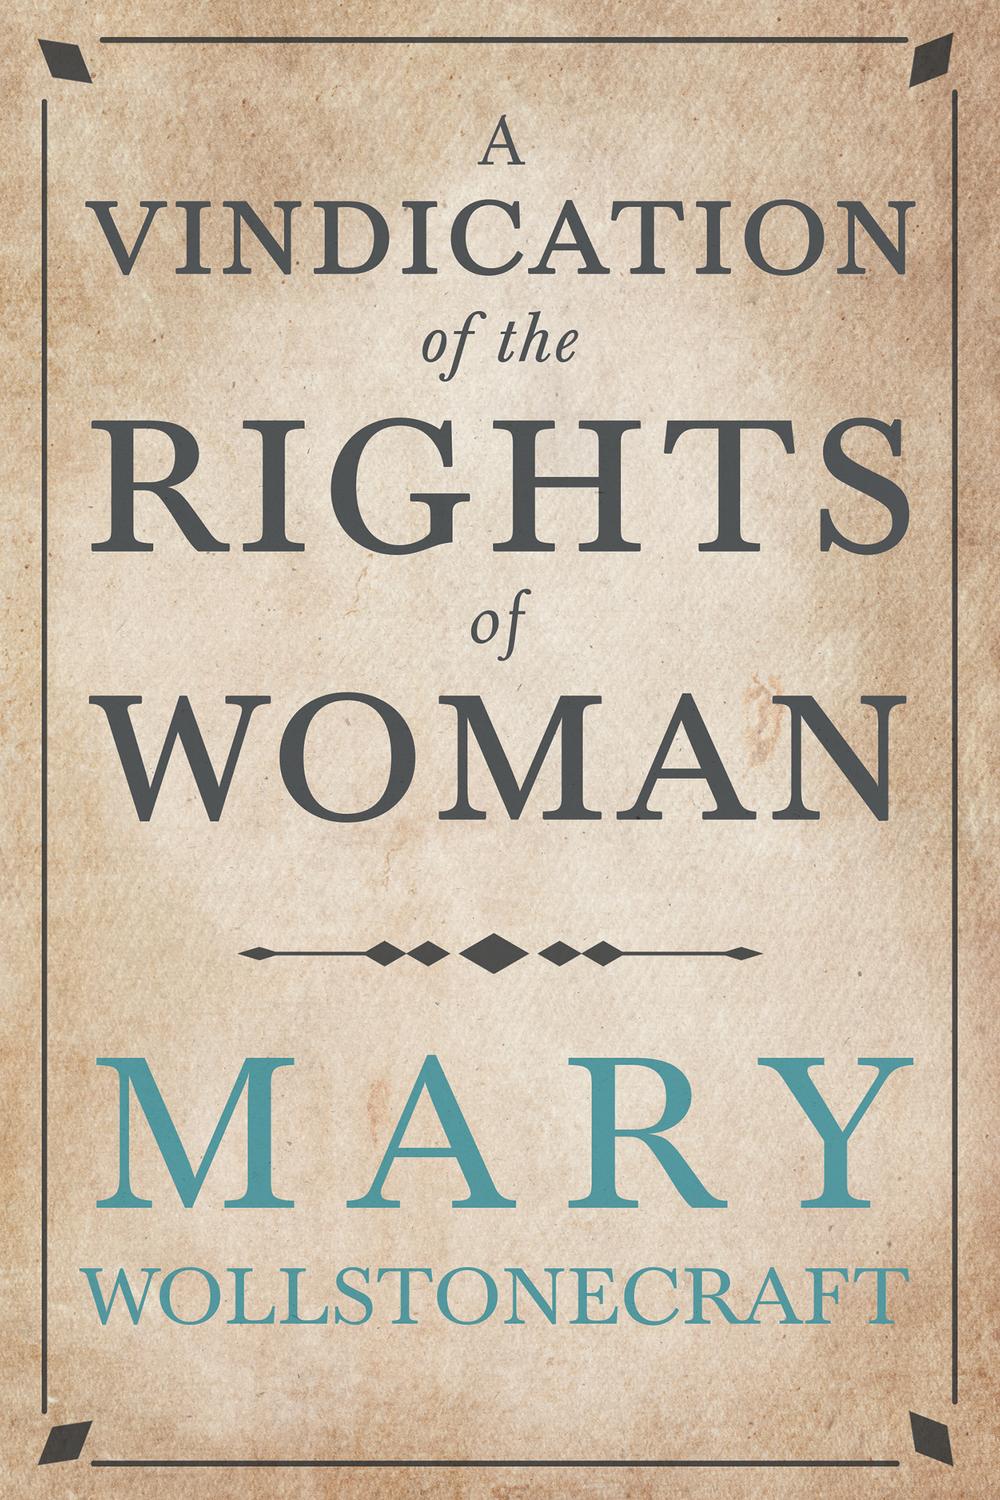 A Vindication of the Rights of Woman - Mary Wollstonecraft,,